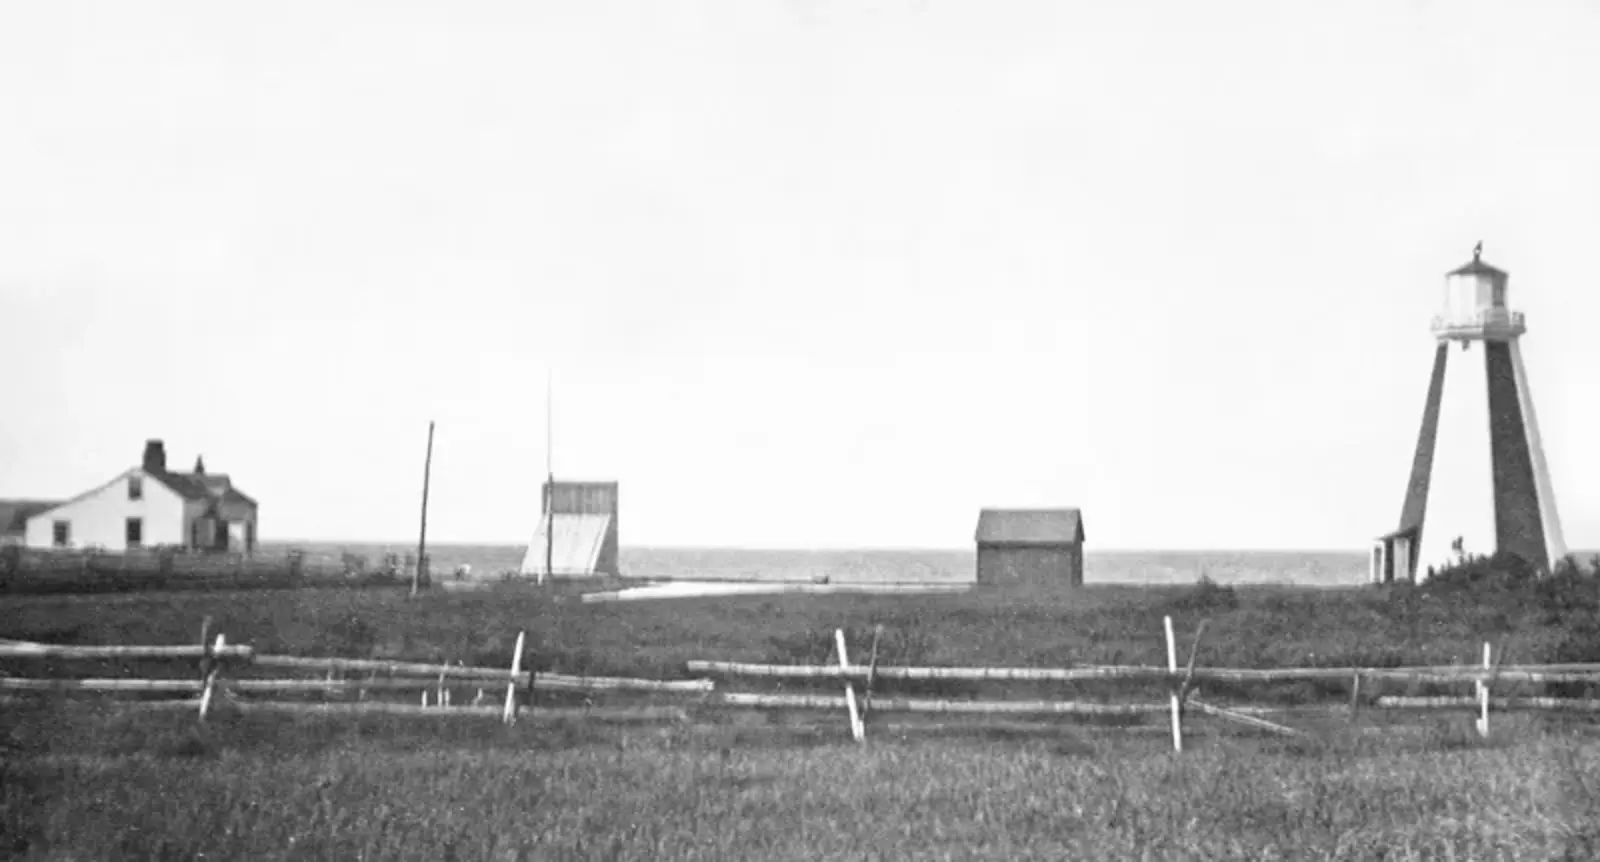 Low Point Lighthouse and dwelling in 1890